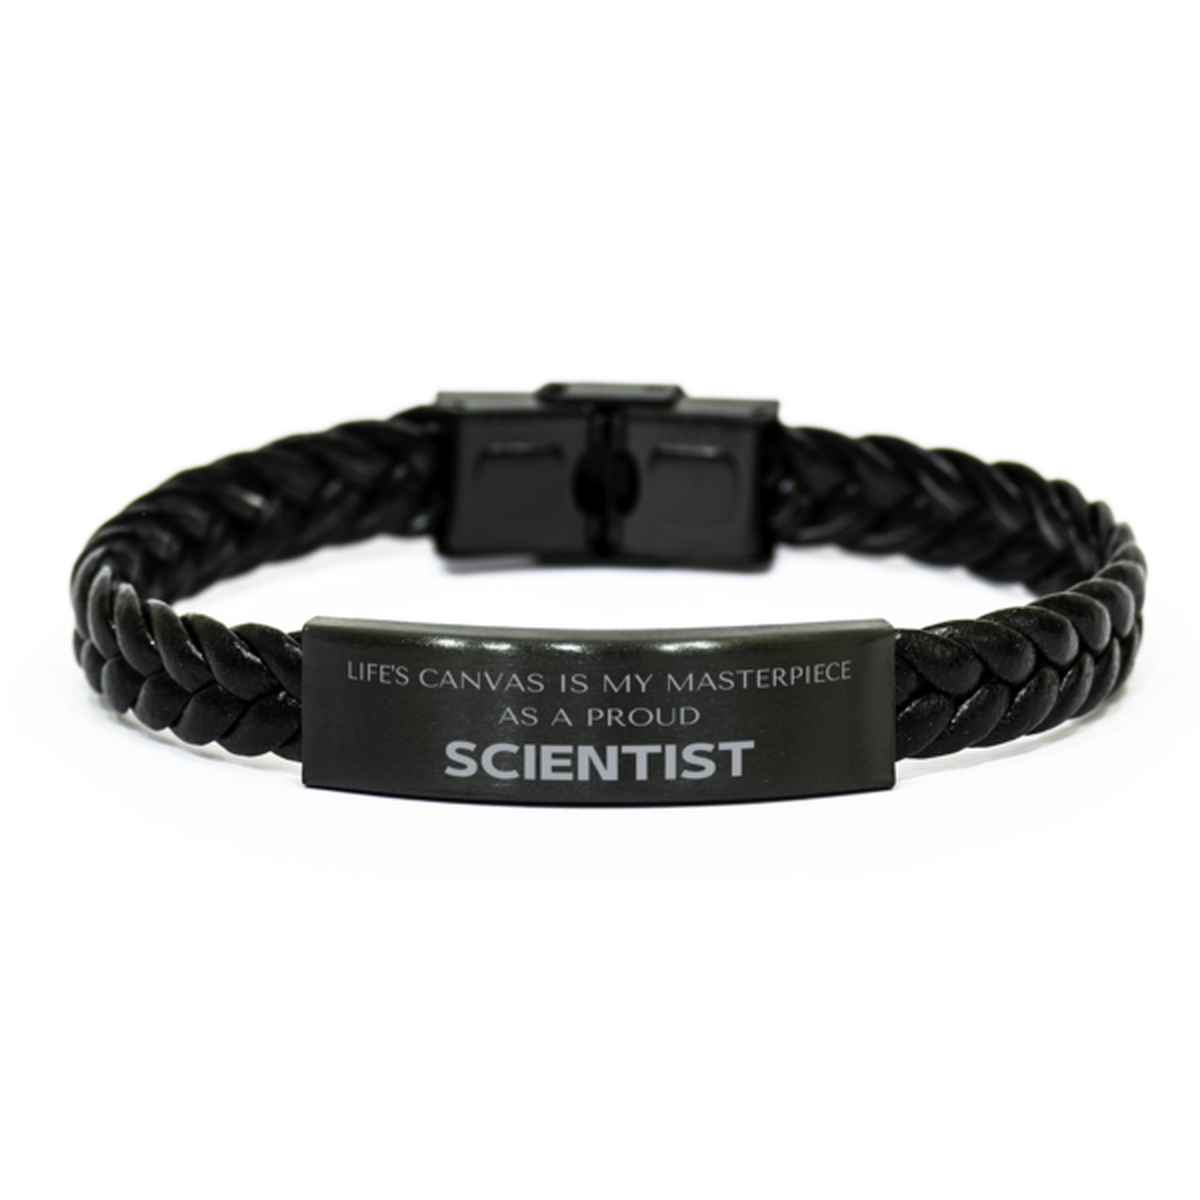 Proud Scientist Gifts, Life's canvas is my masterpiece, Epic Birthday Christmas Unique Braided Leather Bracelet For Scientist, Coworkers, Men, Women, Friends